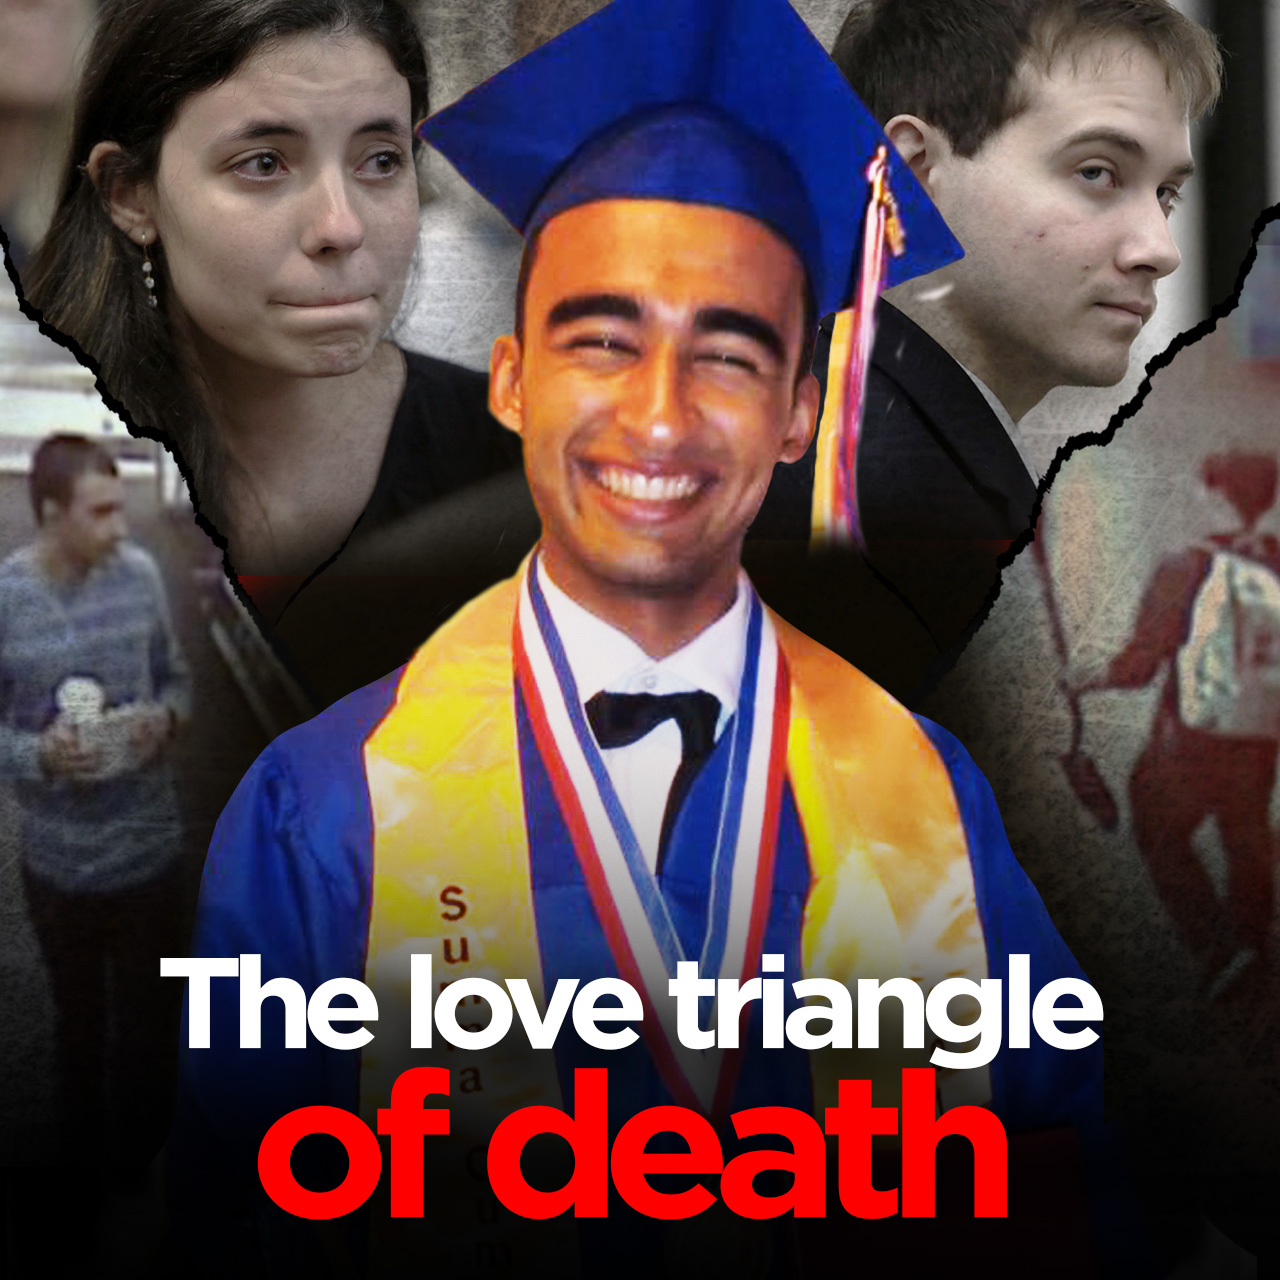 The love triangle of death: Christian Aguilar